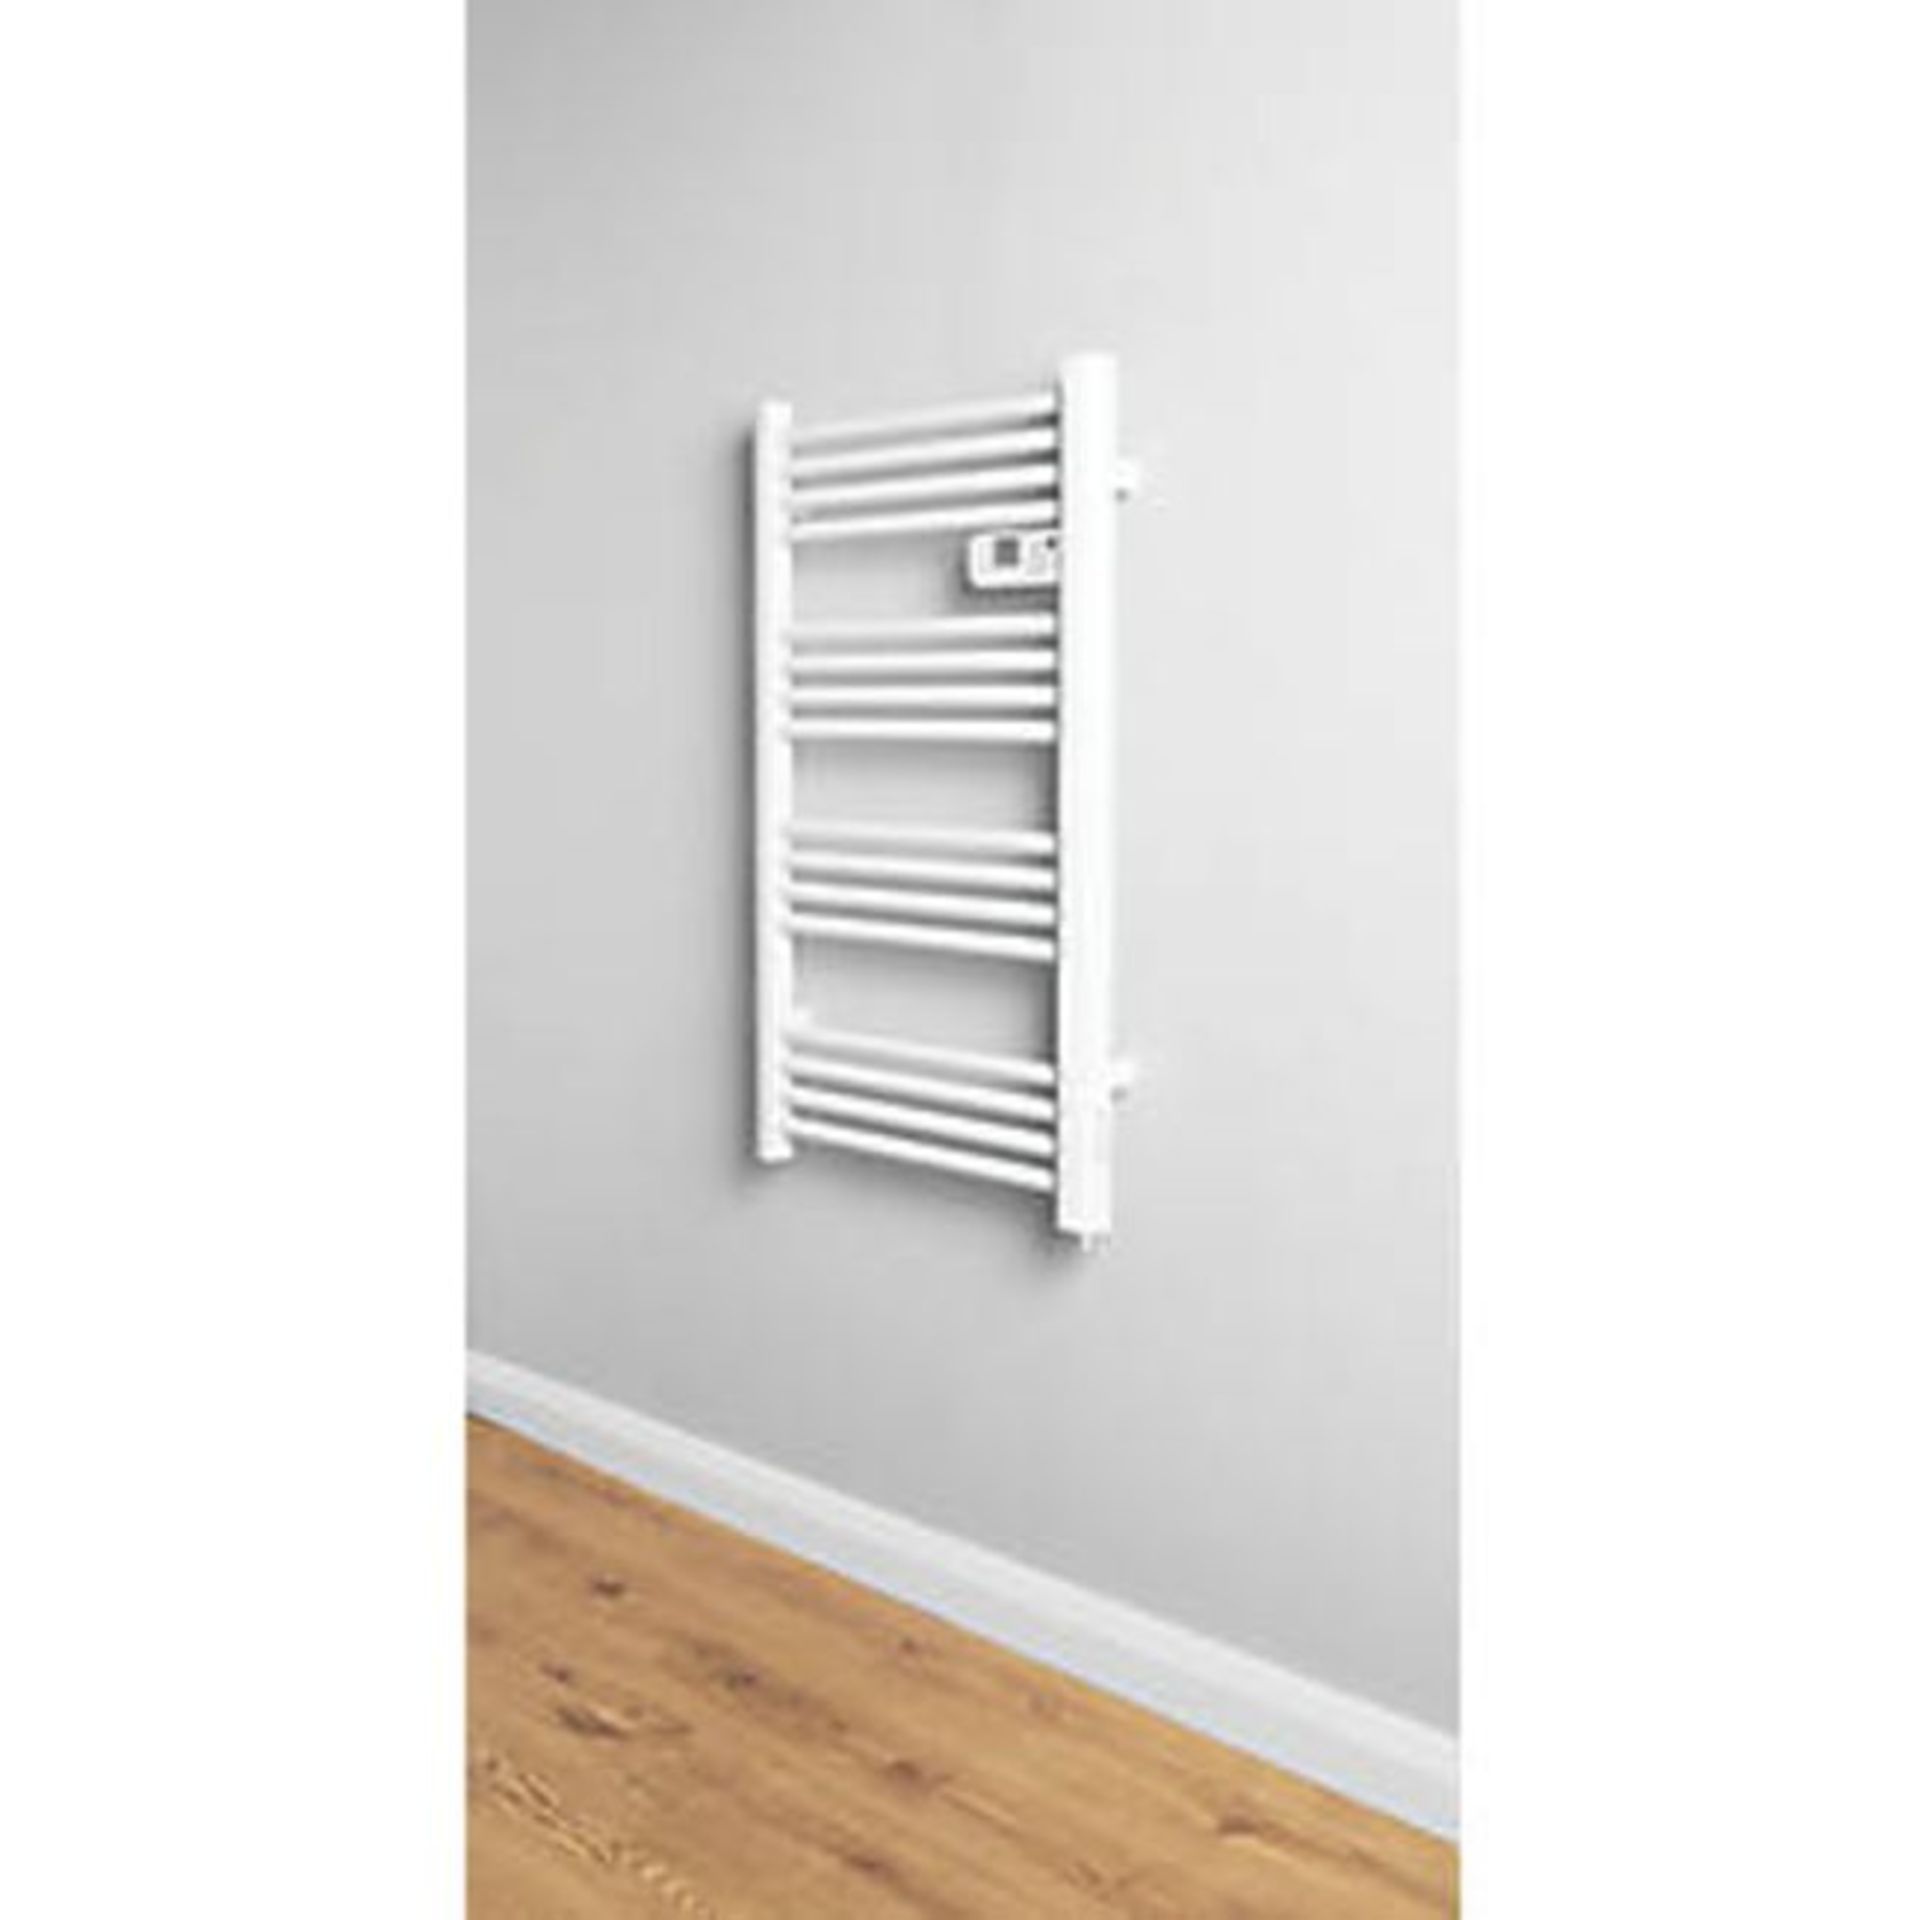 (Gh17) Kandor 500W Electric White Towel Warmer (H)980 mm (W)550 mm. This Electrical 500W White To...